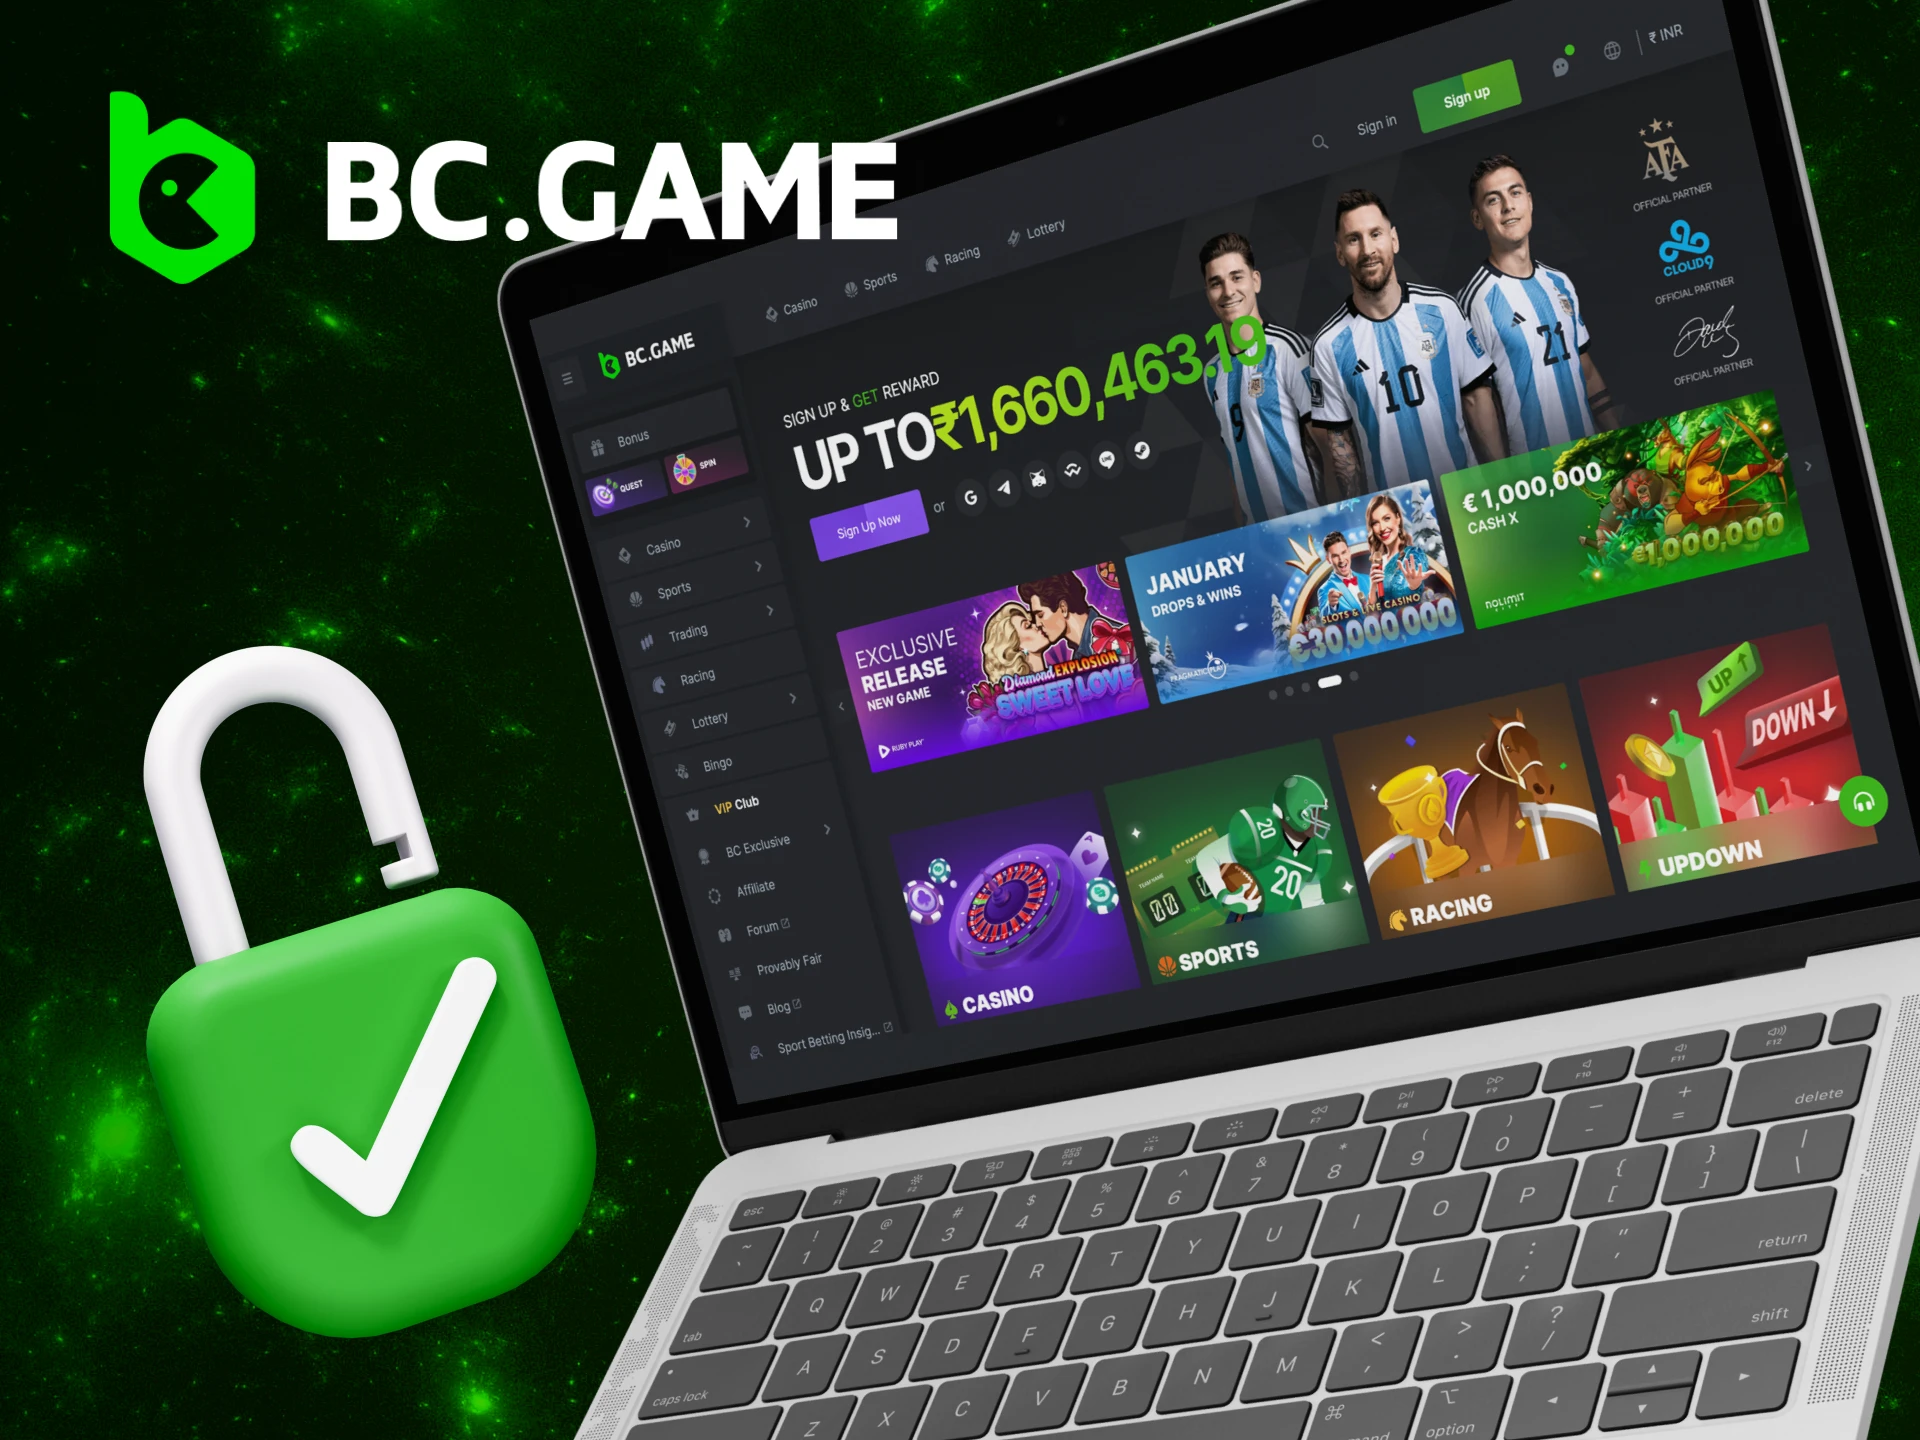 What are the anti-fraud rules at the BC Game online casino in India.